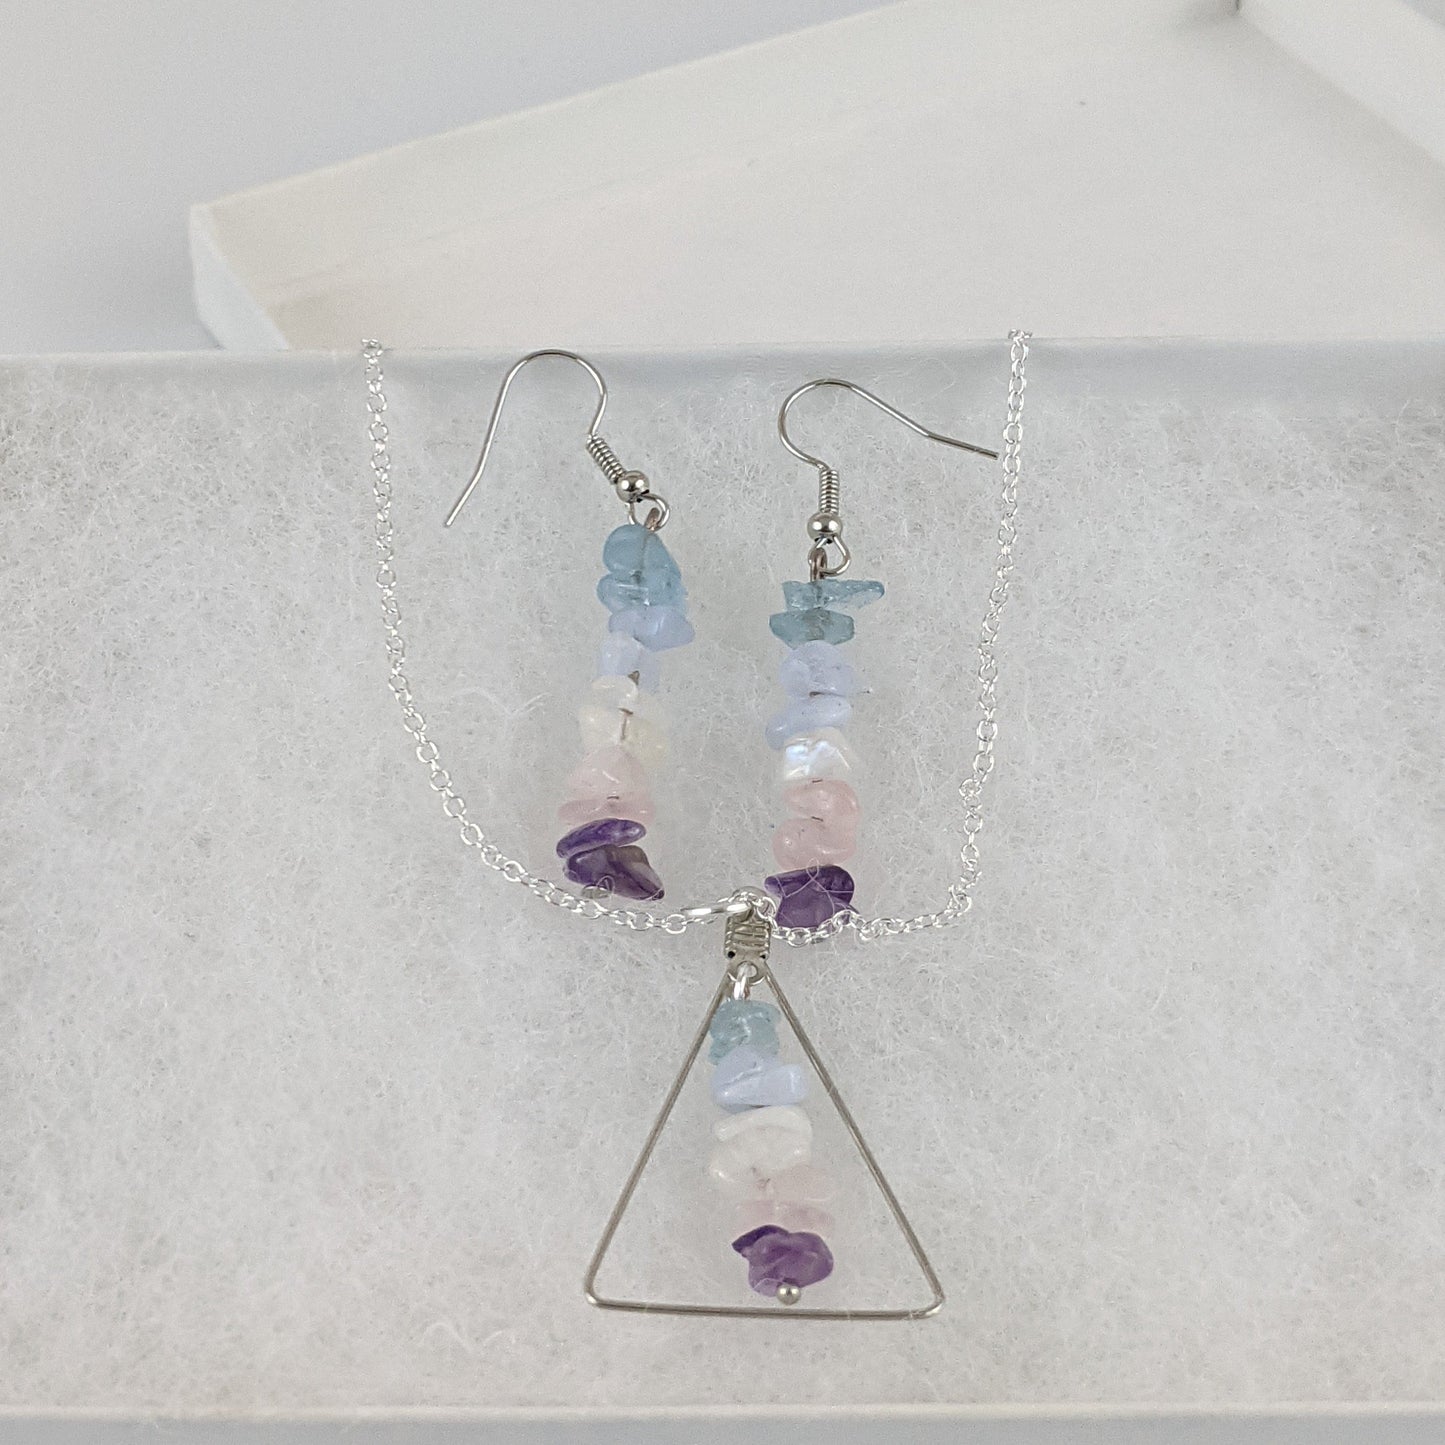 Good Vibes: Stress Relief and Calm Triangle Pendant and Dangle Earrings Set